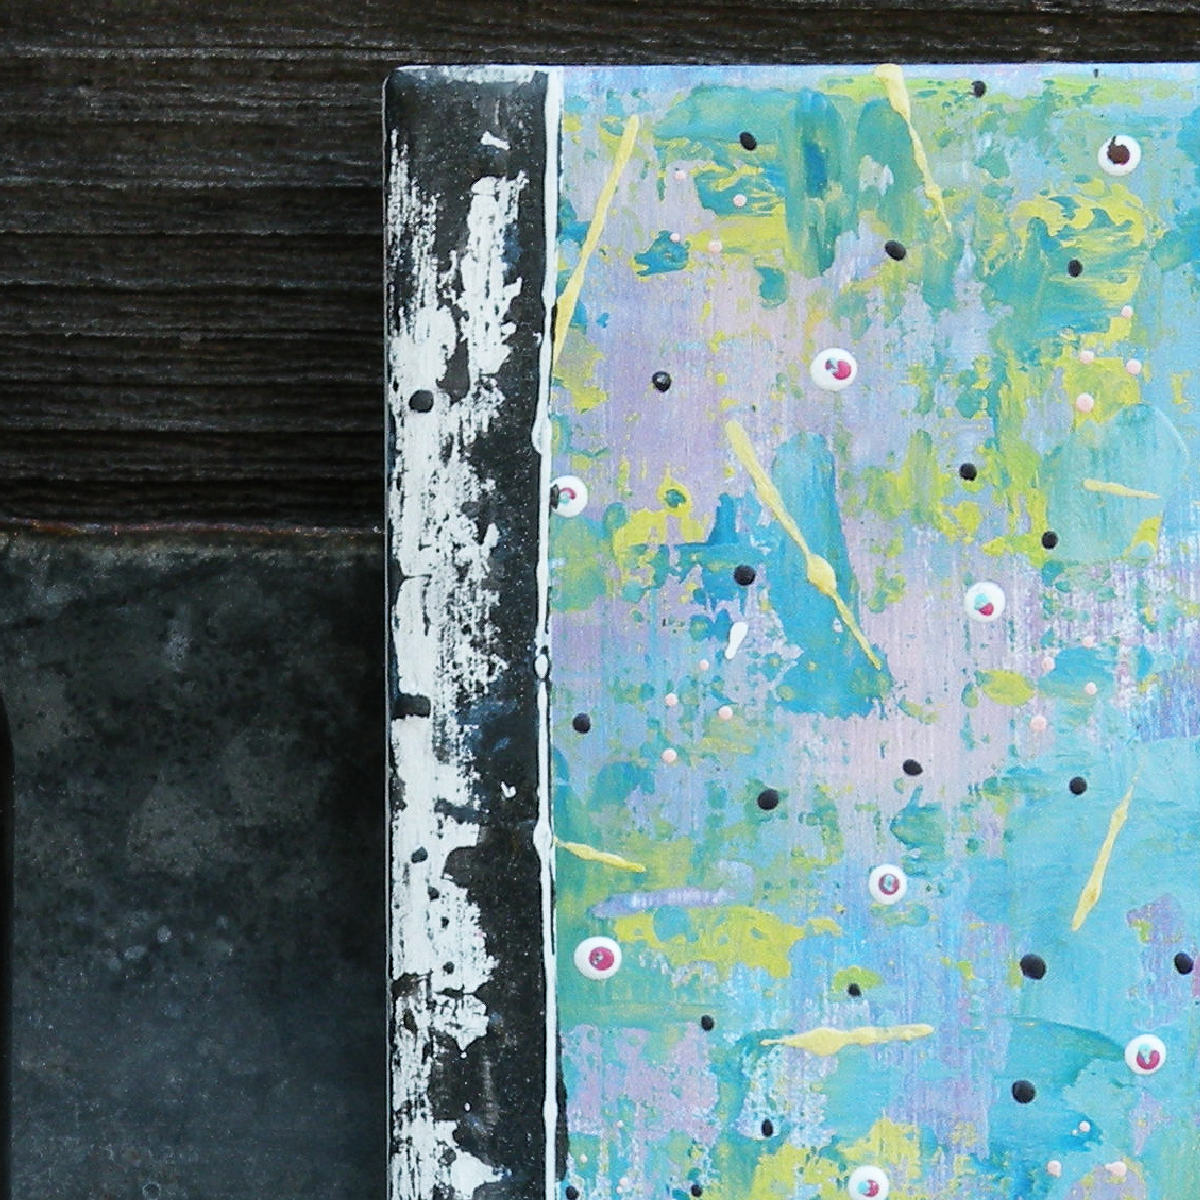 Bursts of Light - Original Painting on Upcycled Tile